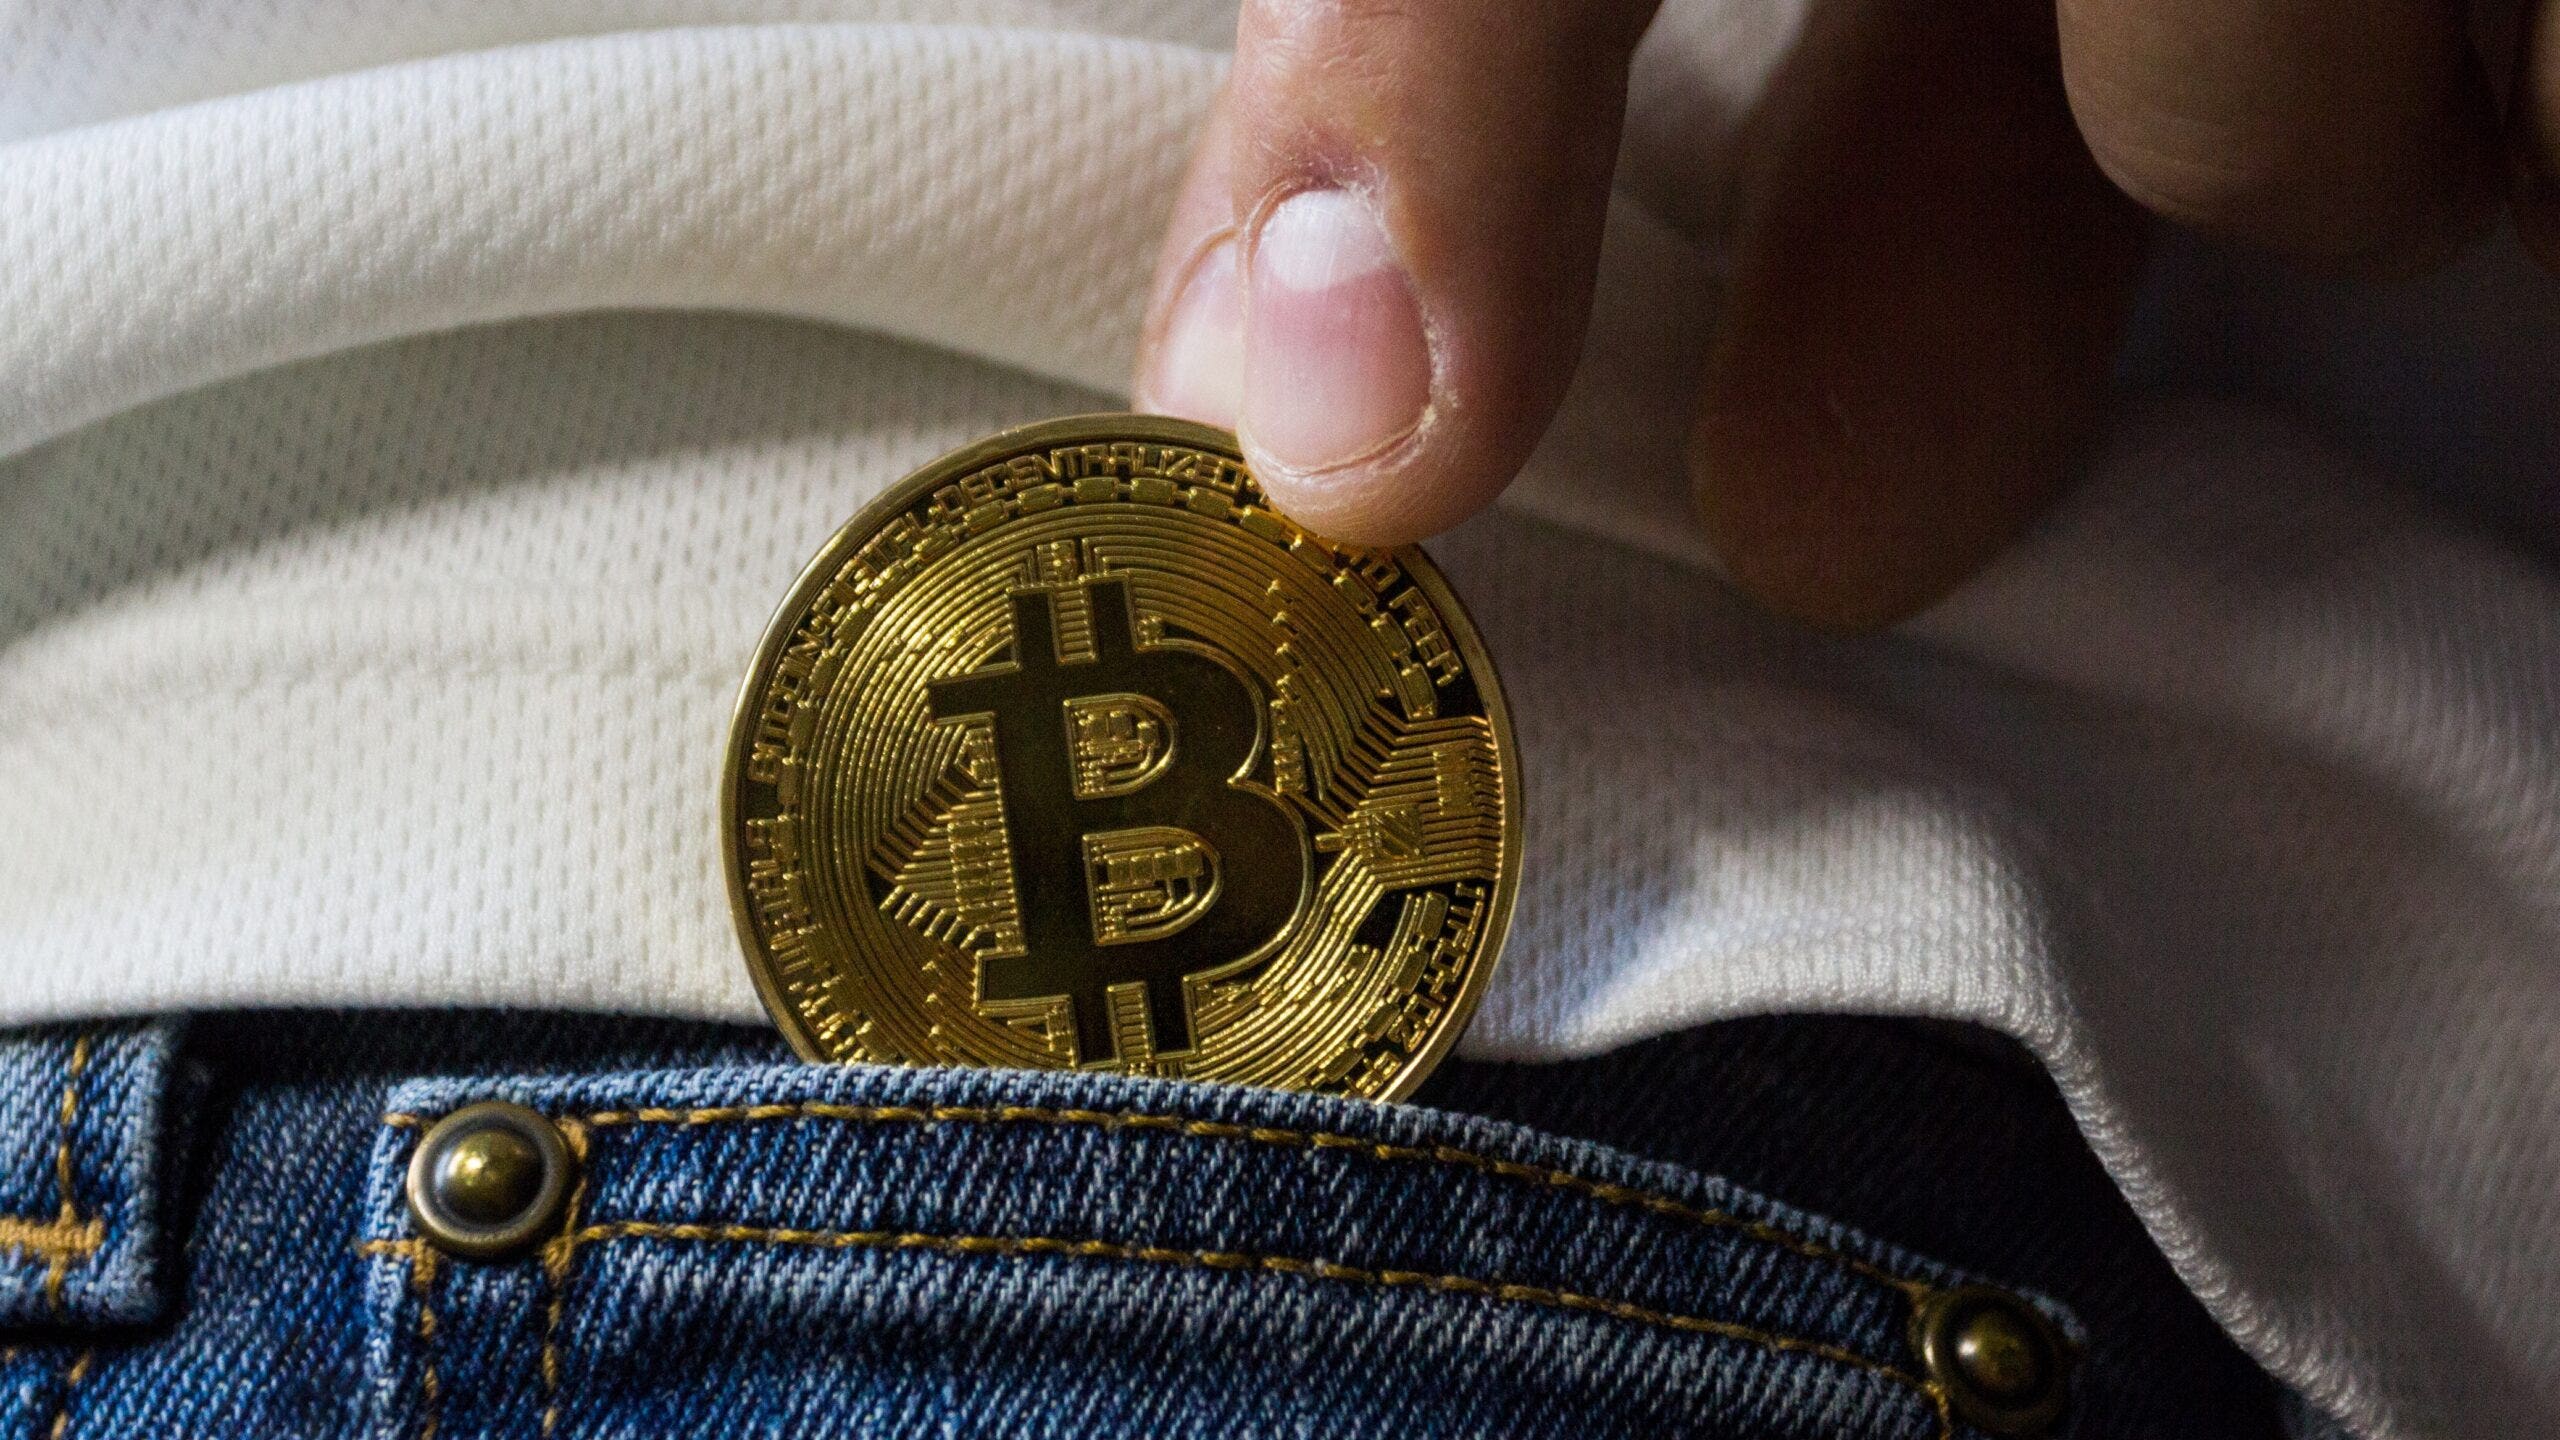 How to Buy Bitcoin in India: Disclaimers and The Full How-To